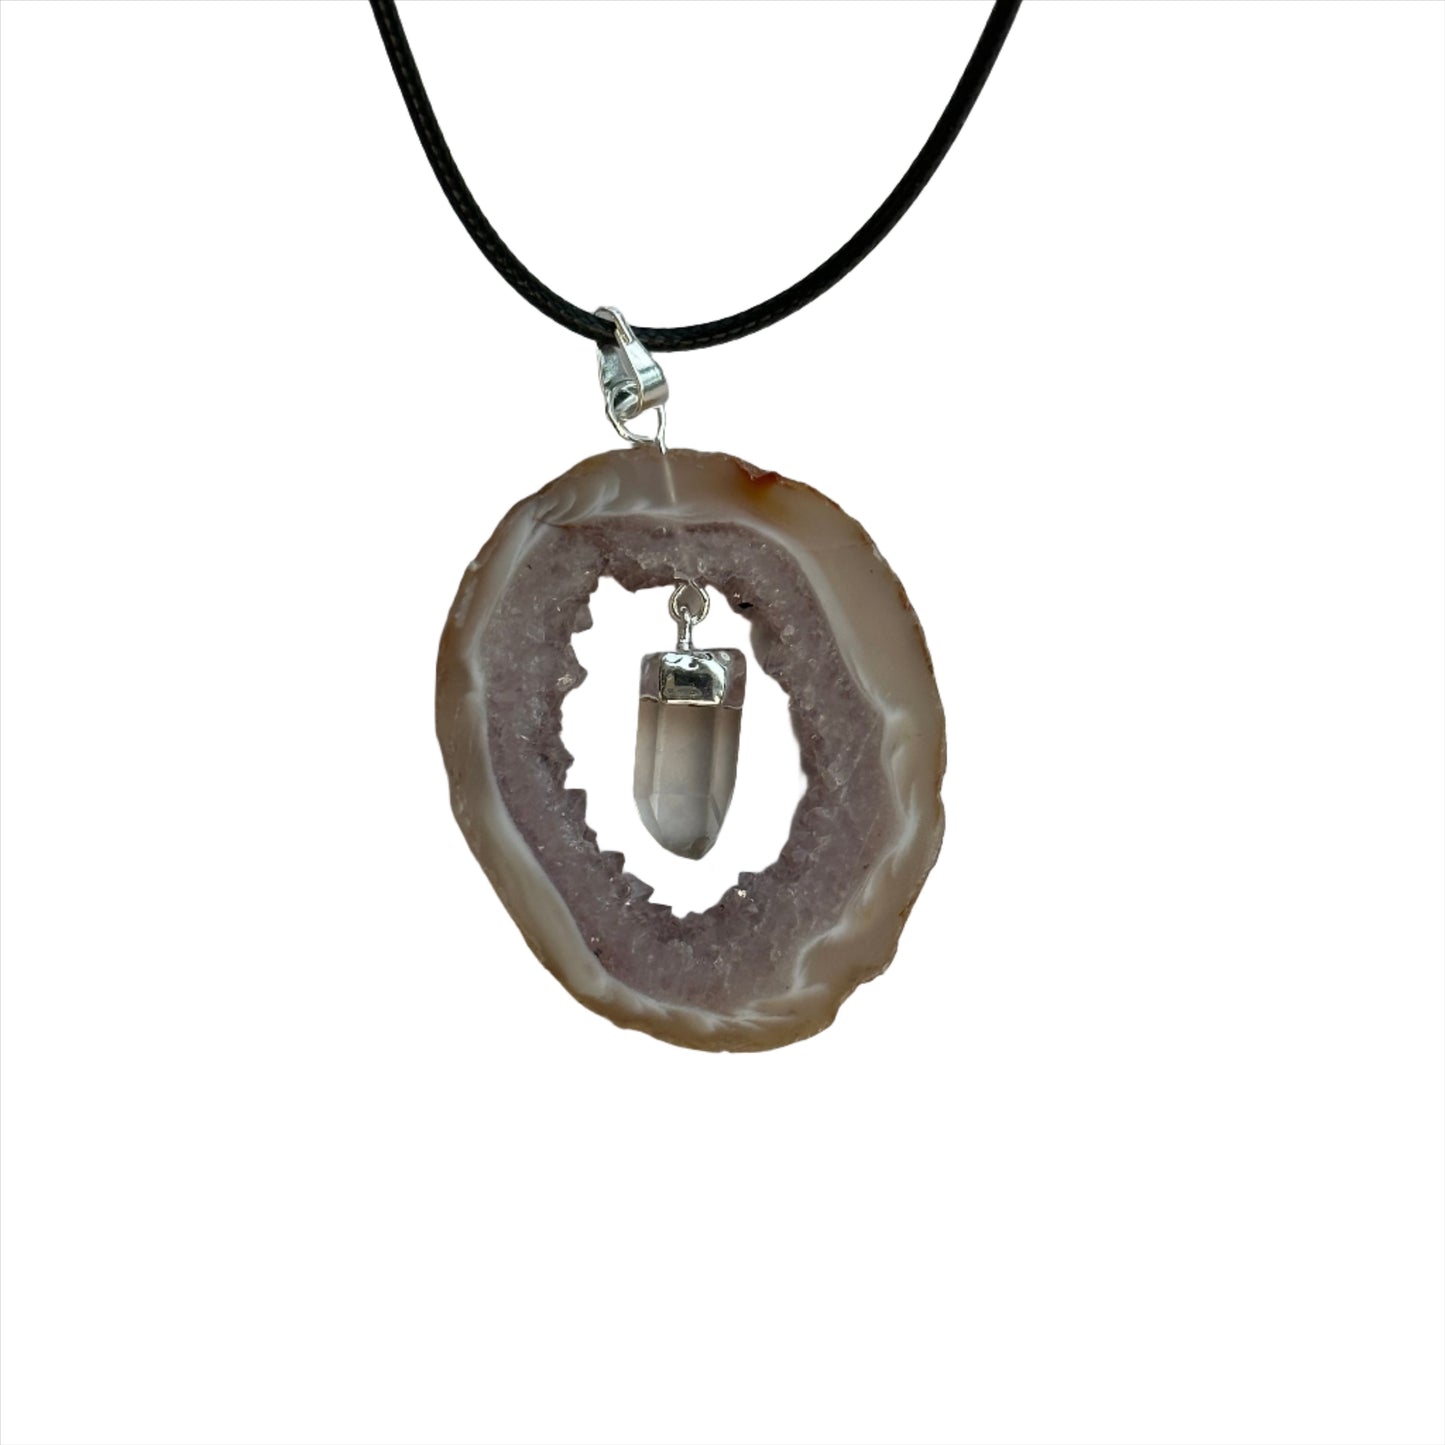 Agate Slice with Clear Quartz Hanging Pendant Necklace